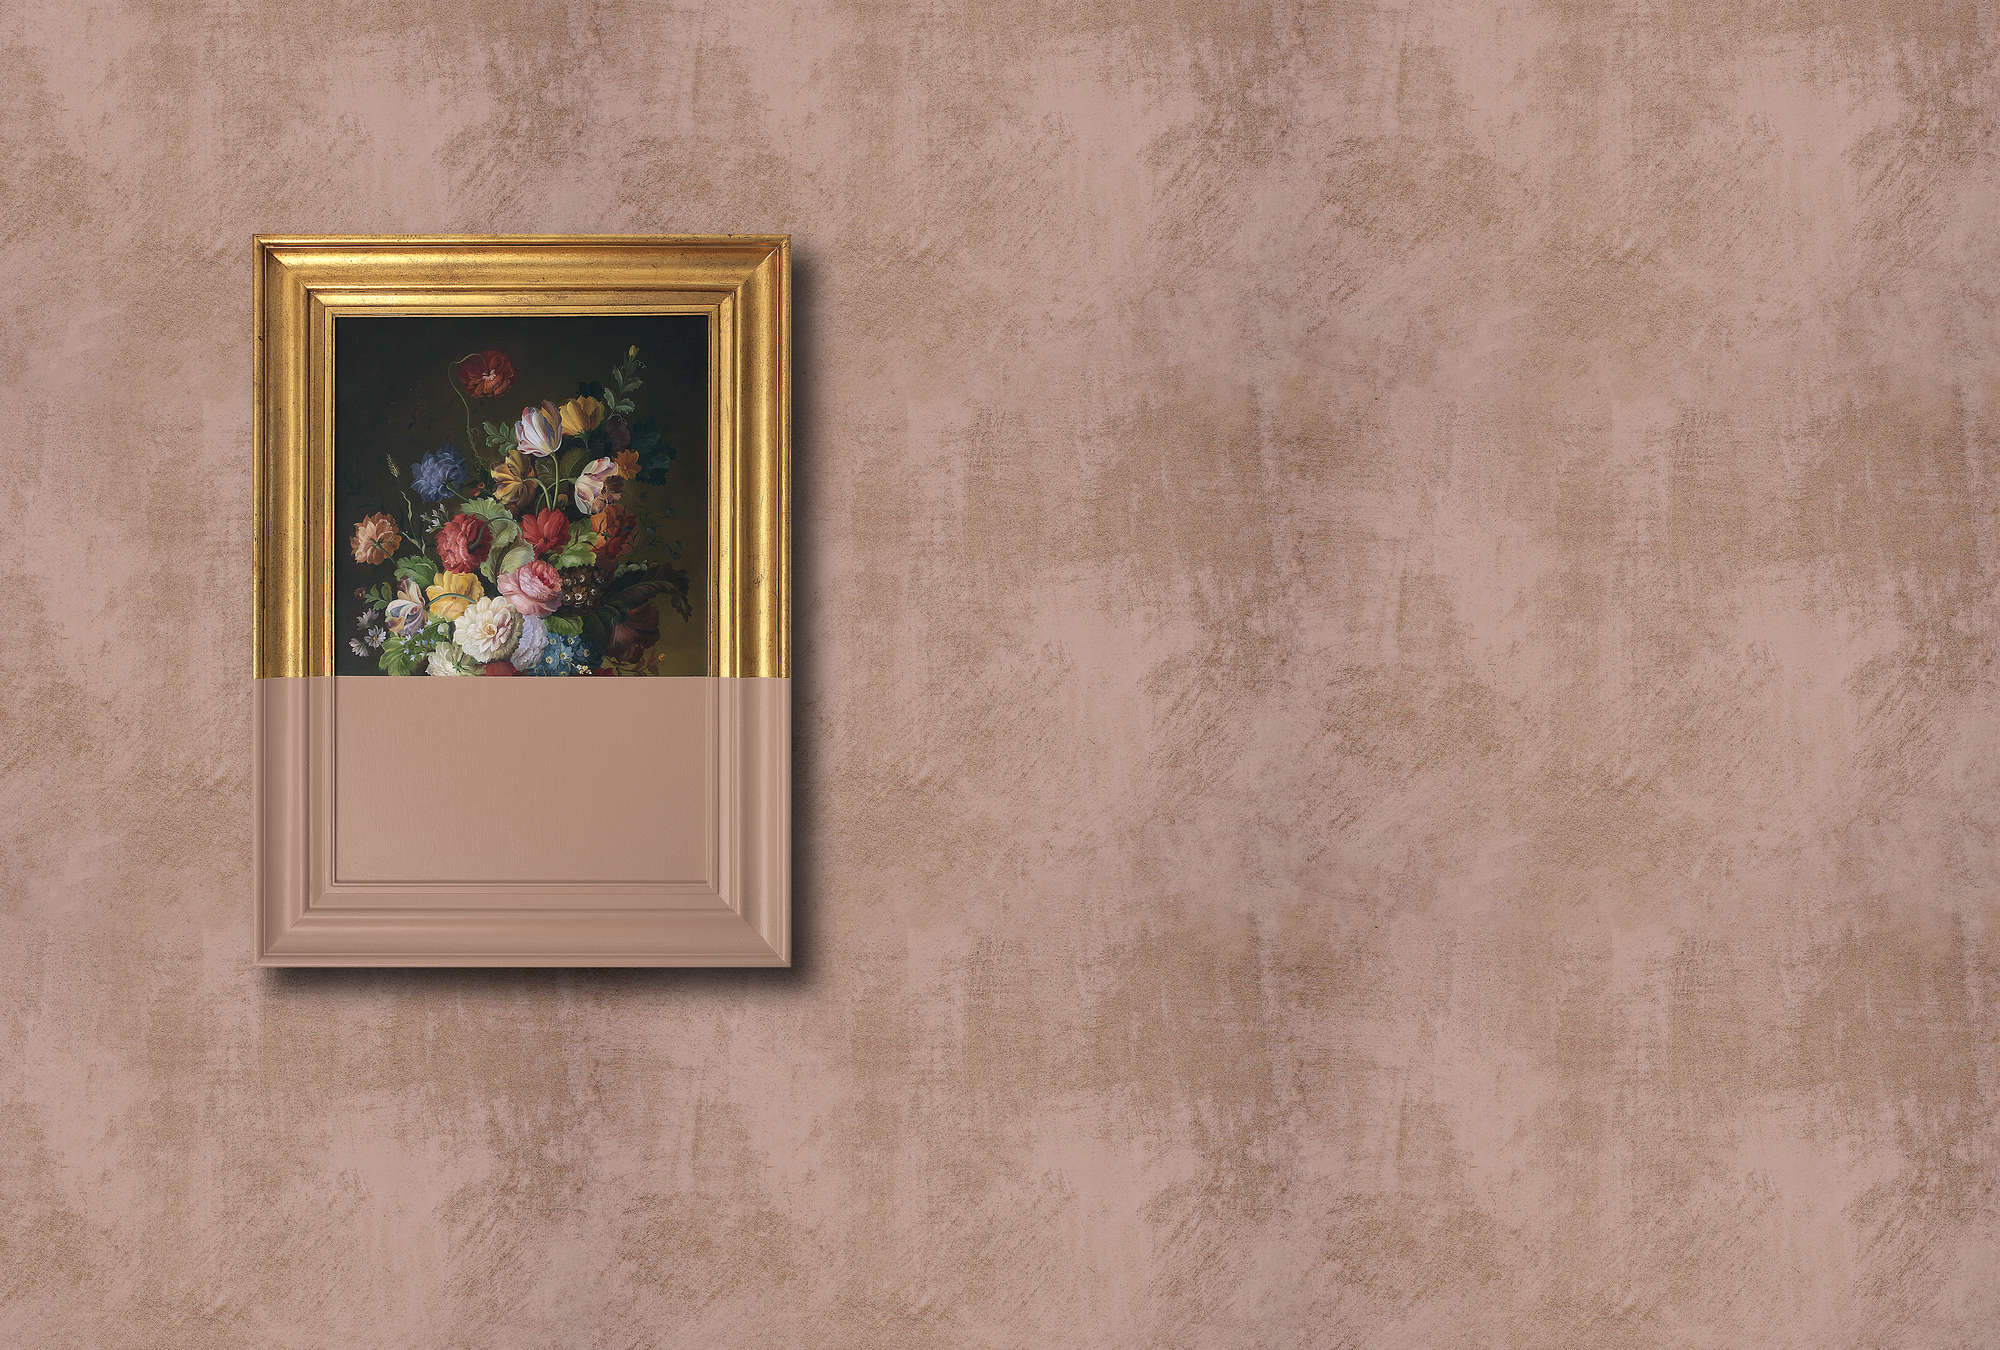             Frame 2 - Wiped Plaster Structure Painted Artwork Wallpaper, Copper - Copper, Pink | Premium Smooth Nonwoven
        